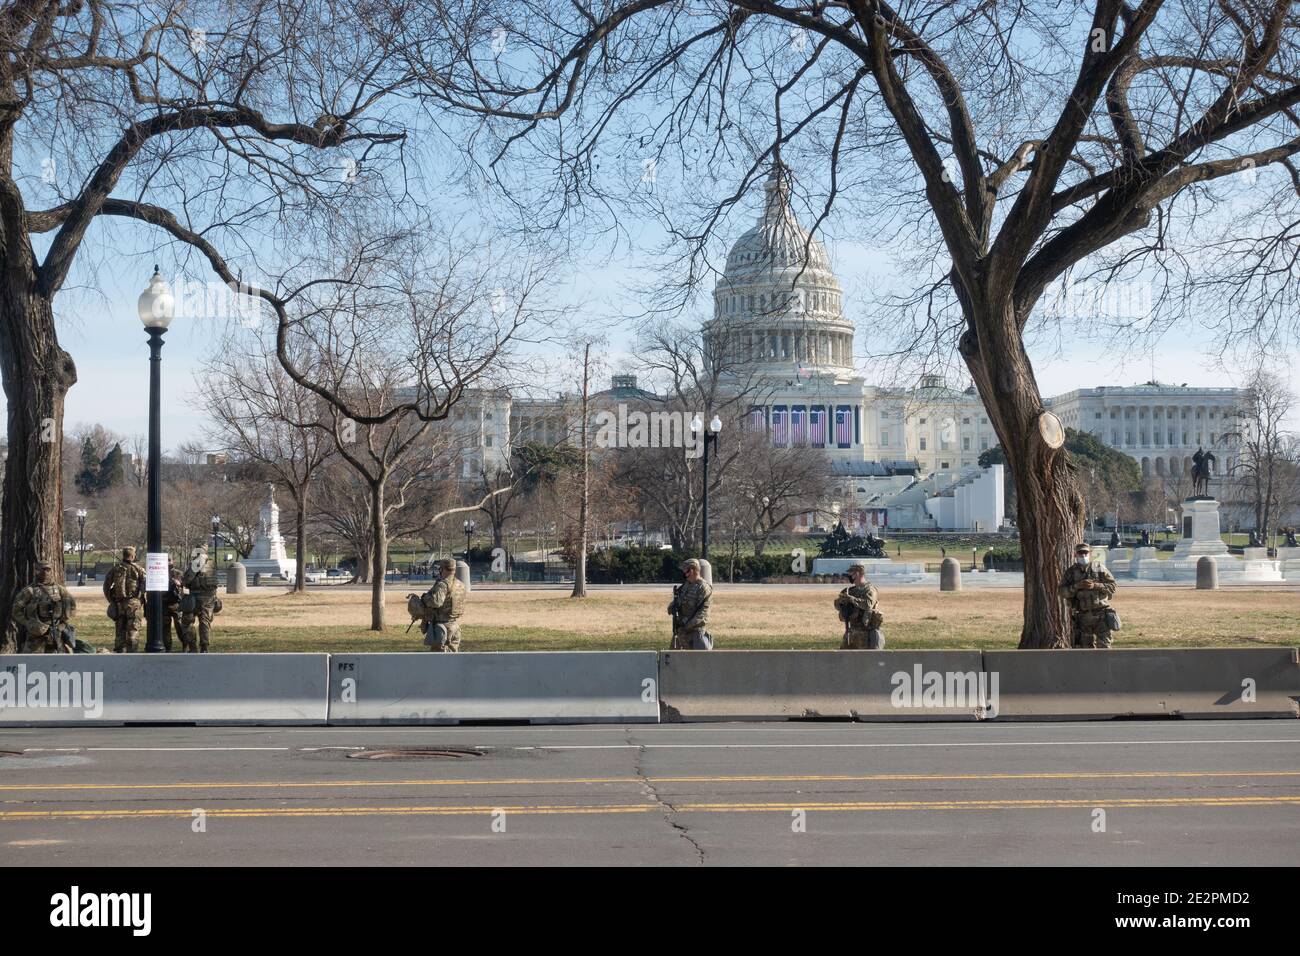 WASHINGTON, DC - JAN. 14, 2021: National Guard stand watch around the U.S. Capitol in a show of force in preparation for anticipated Trump extremist protests and Joe Biden's upcoming inauguration. Stock Photo